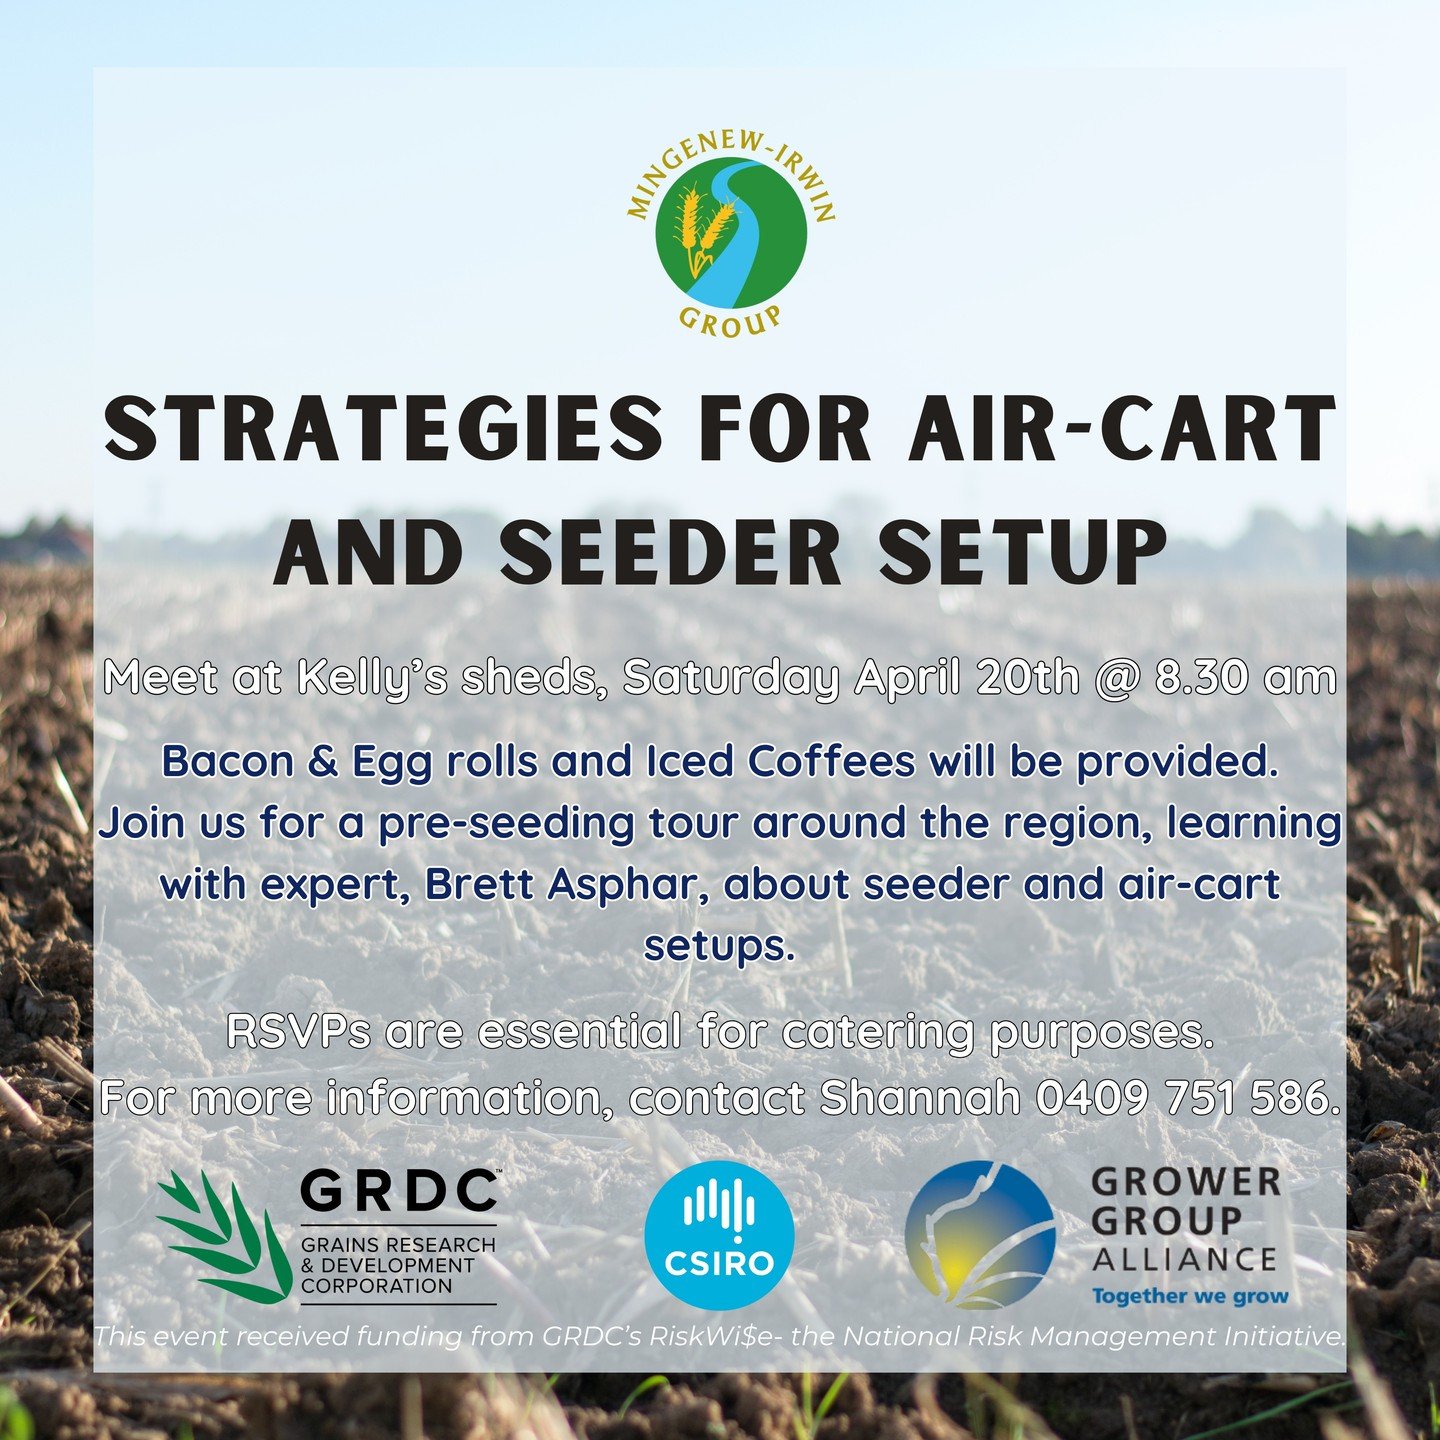 🌱Join us this Saturday🌱to learn more about strategies for air-cart and seeder setups with Brett Asphar. 

This is a casual educational session and an opportunity to ask questions, as well as see what others within the area are doing.

#RiskWise